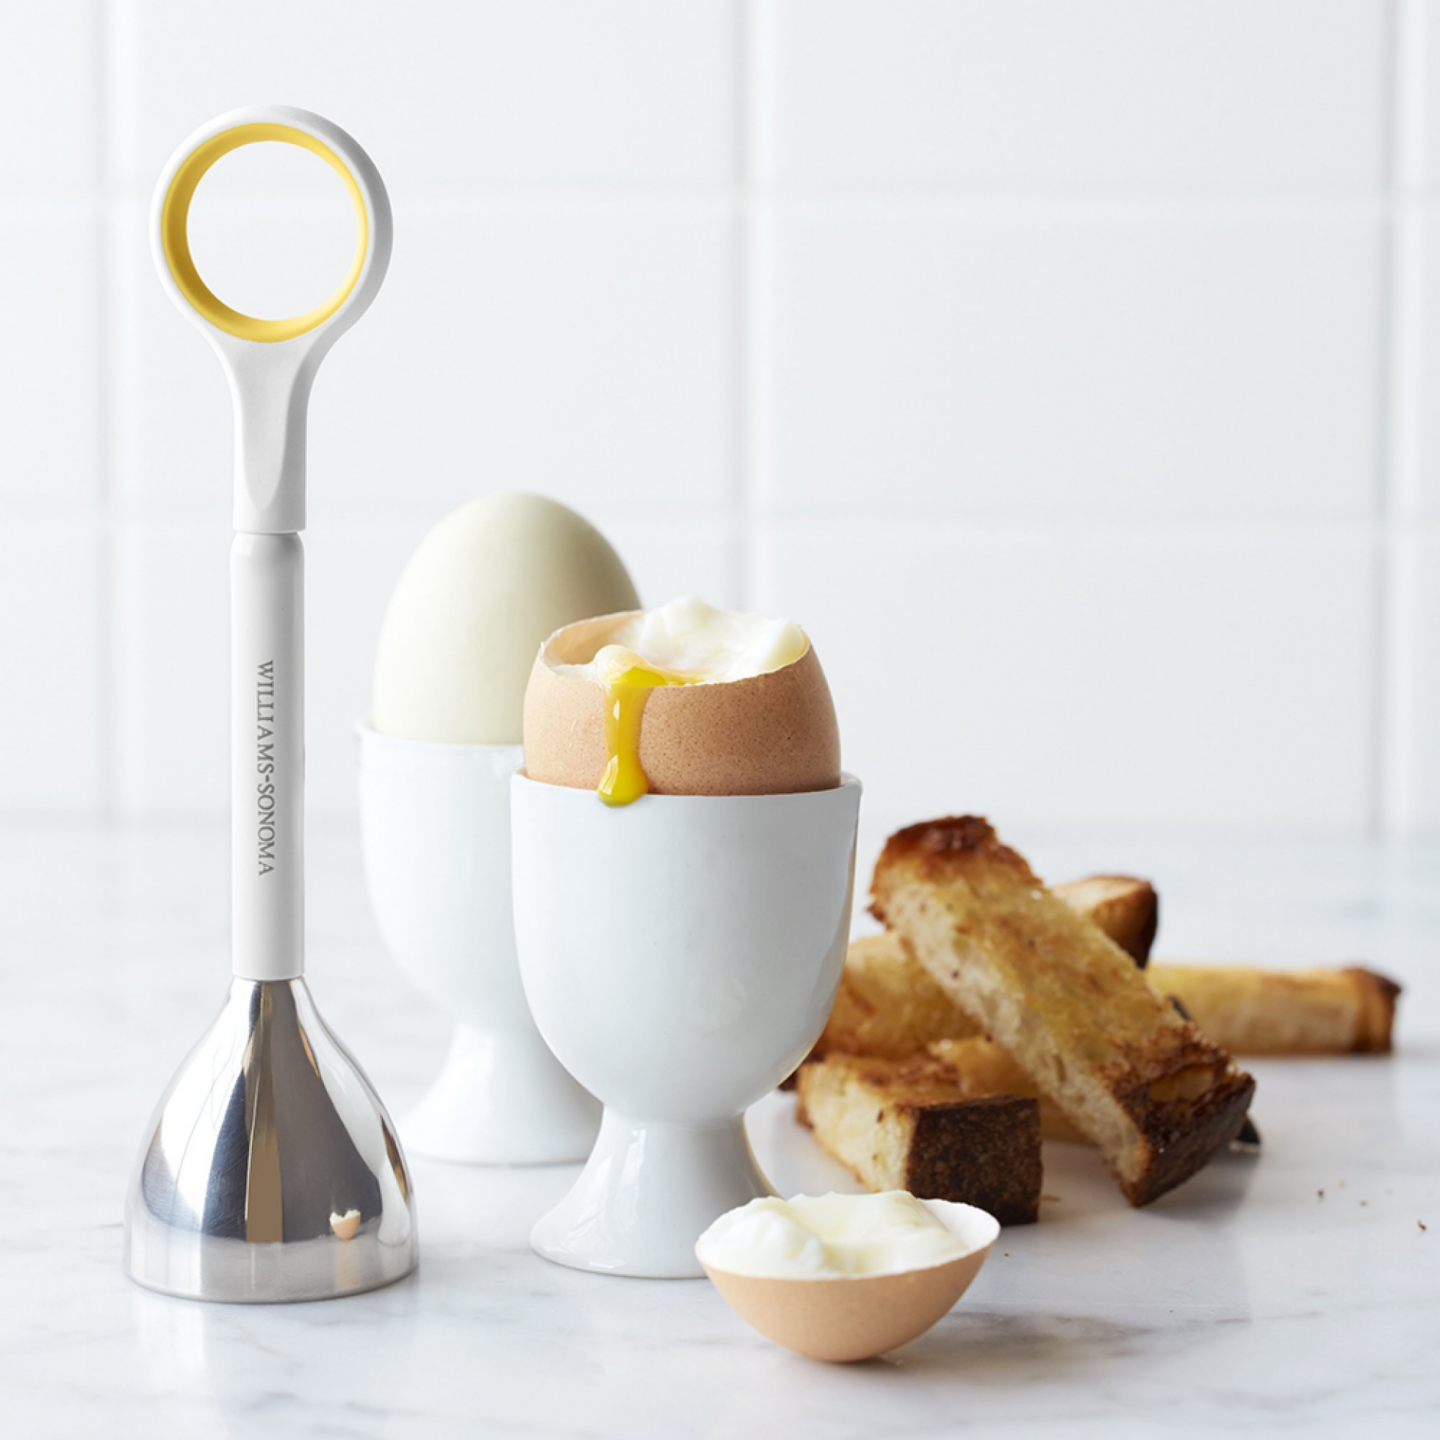 Apilco egg cups from Williams-Sonoma